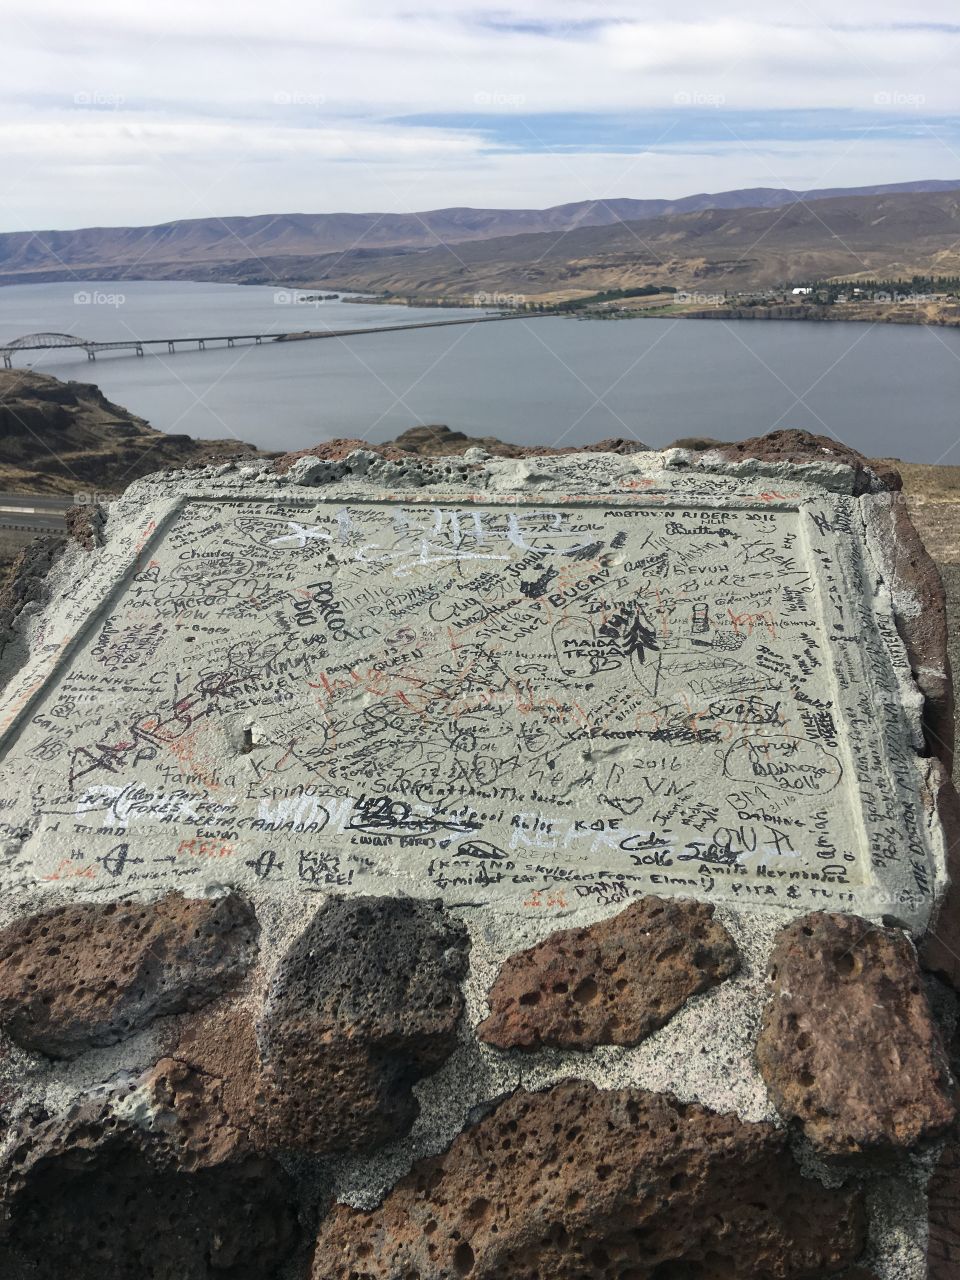 What was once likely a metal plate stamped with the story about Wild Horse monument overhead, is now filled with information of another kind... 